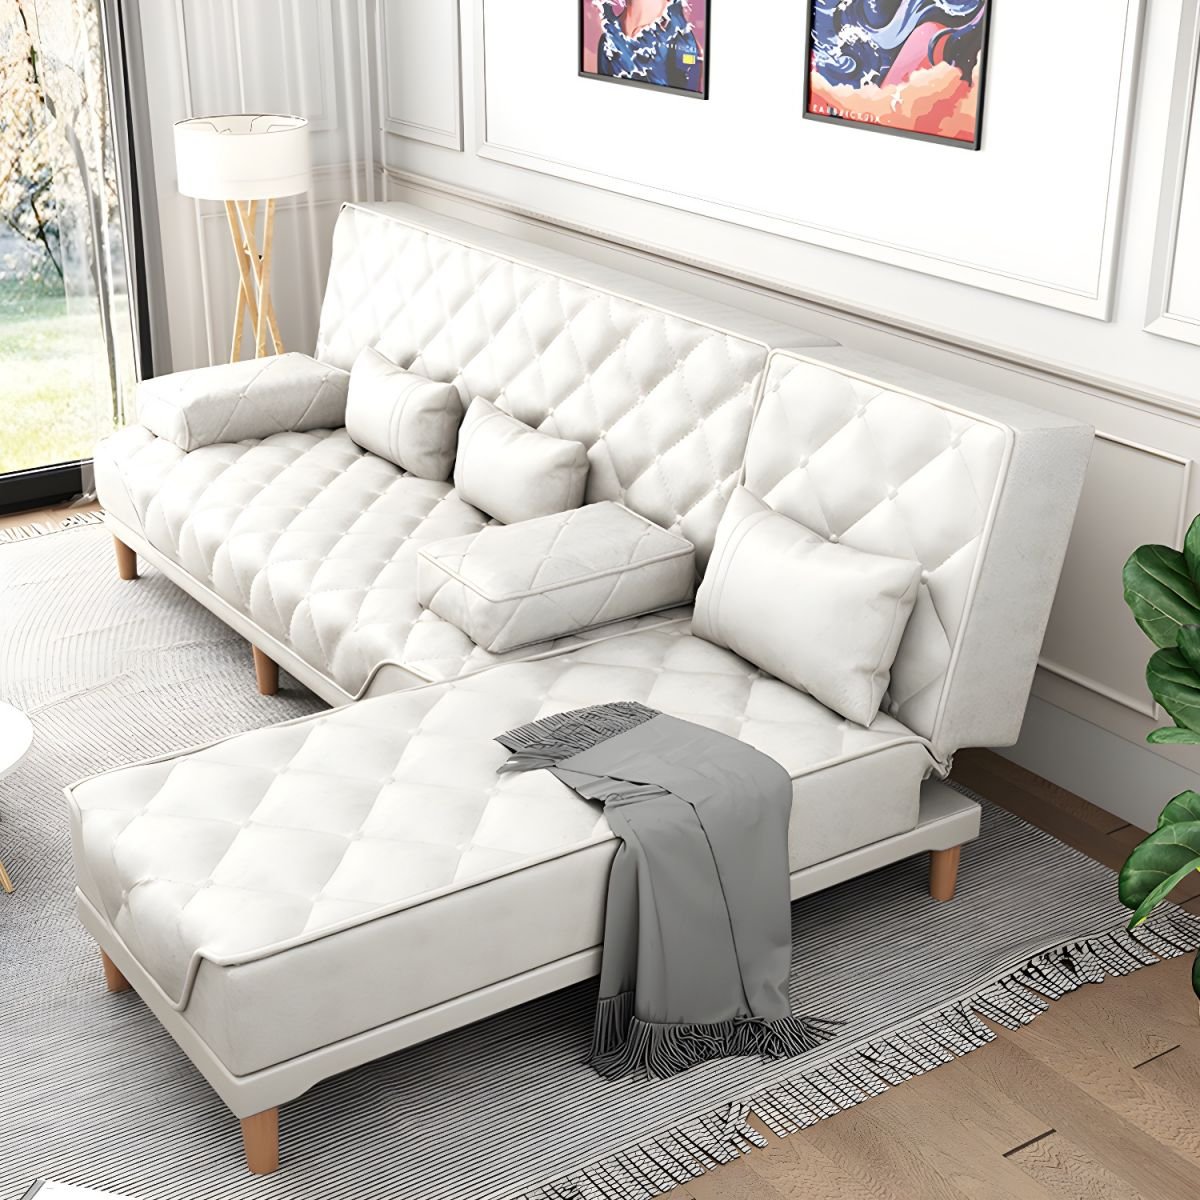 Contemporary Tight Back Convertible Sofa and Chaise with Pillow Top Arm - 96"L x 57"W x 34"H Gray-White Tech Cloth